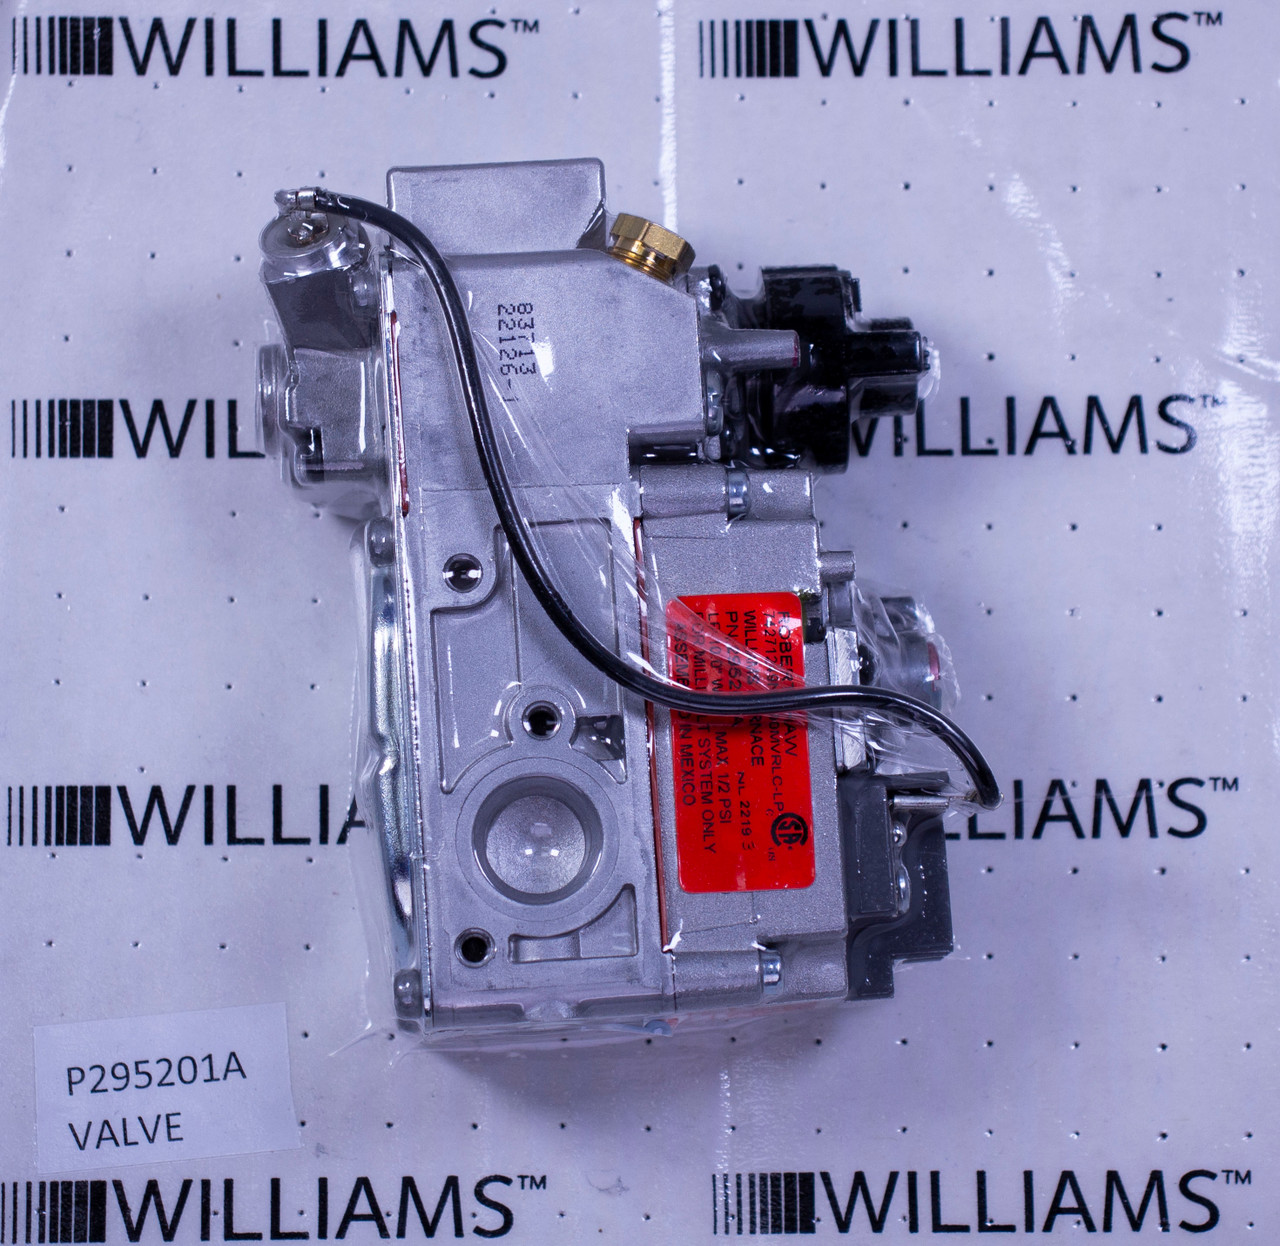 Williams P295201A Gas Valve Wall Direct-Vent, Propane